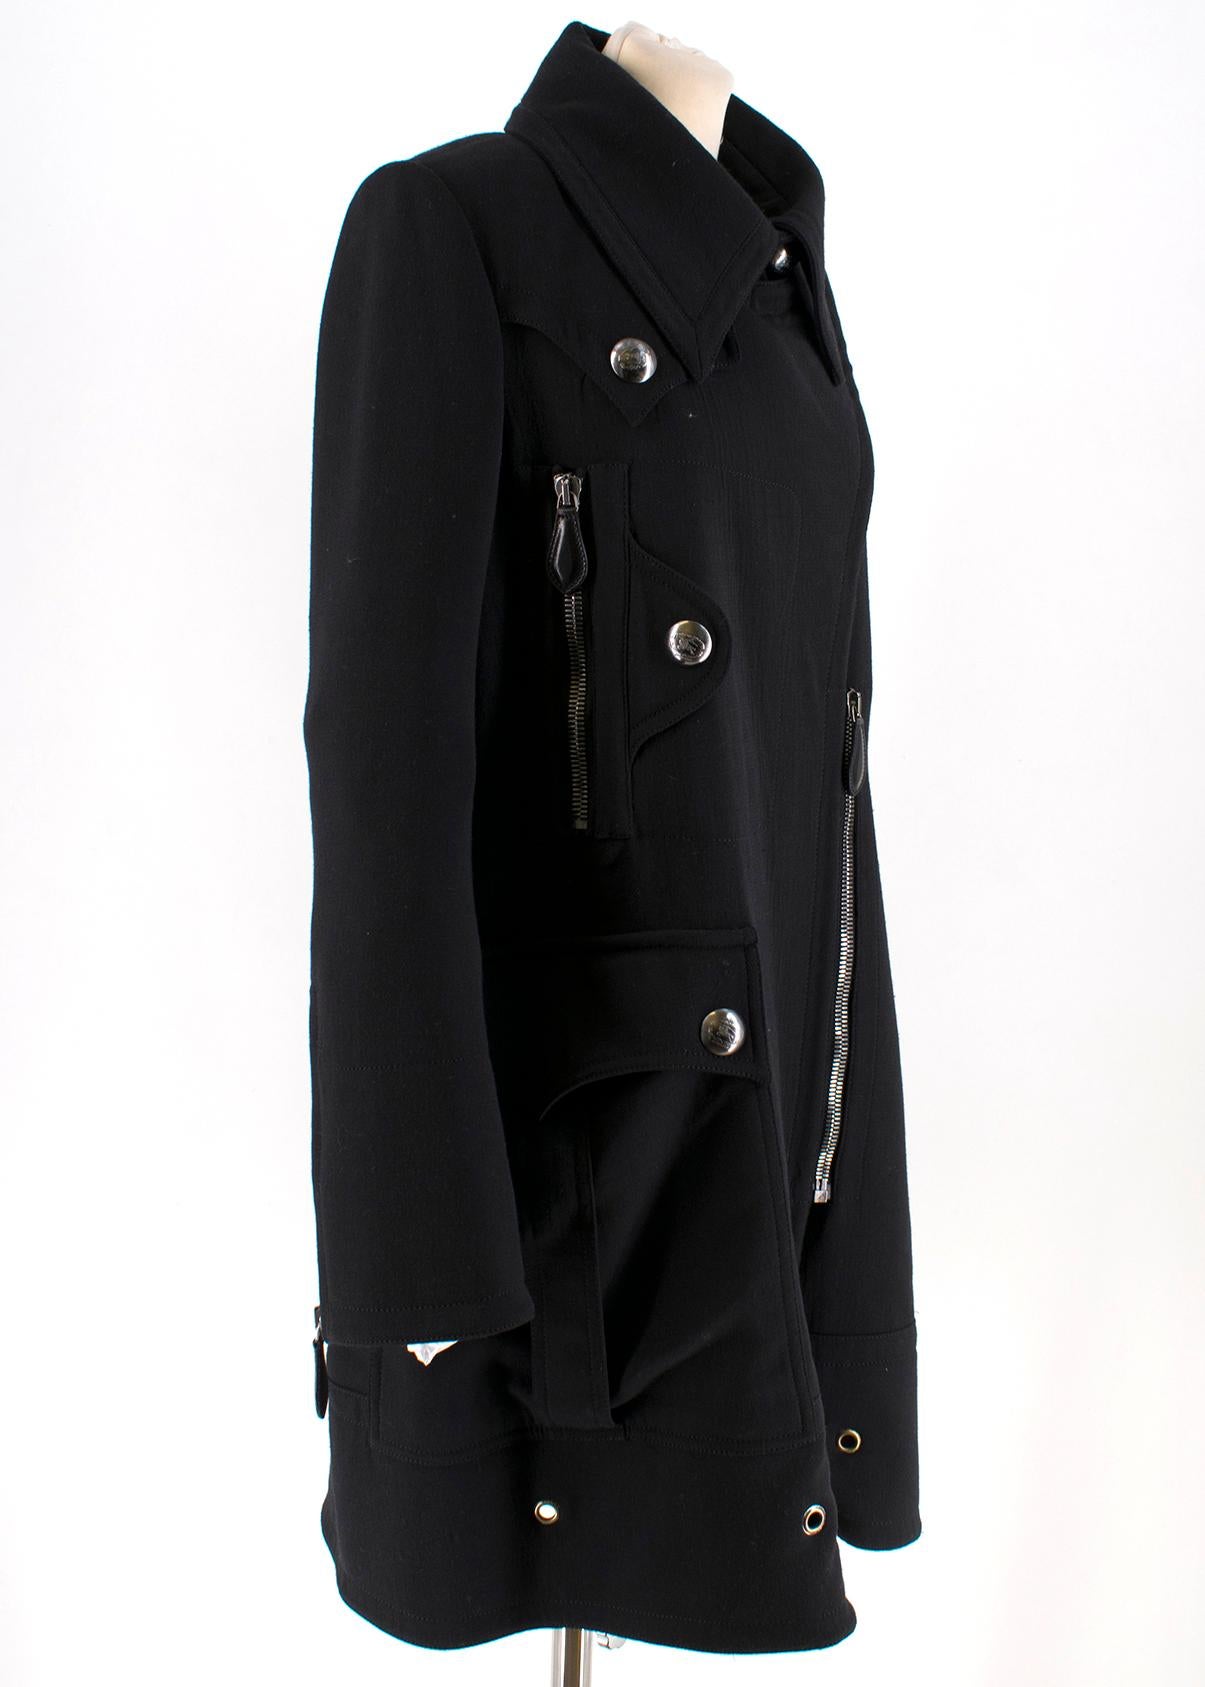 Burberry Black Wool Coat  
 
- Wool black coat 
- Black satin lining
- Two front button pockets
- Two front chest zip pockets 
- Embellished with large Burberry buttons

Please note, these items are pre-owned and may show some signs of storage, even